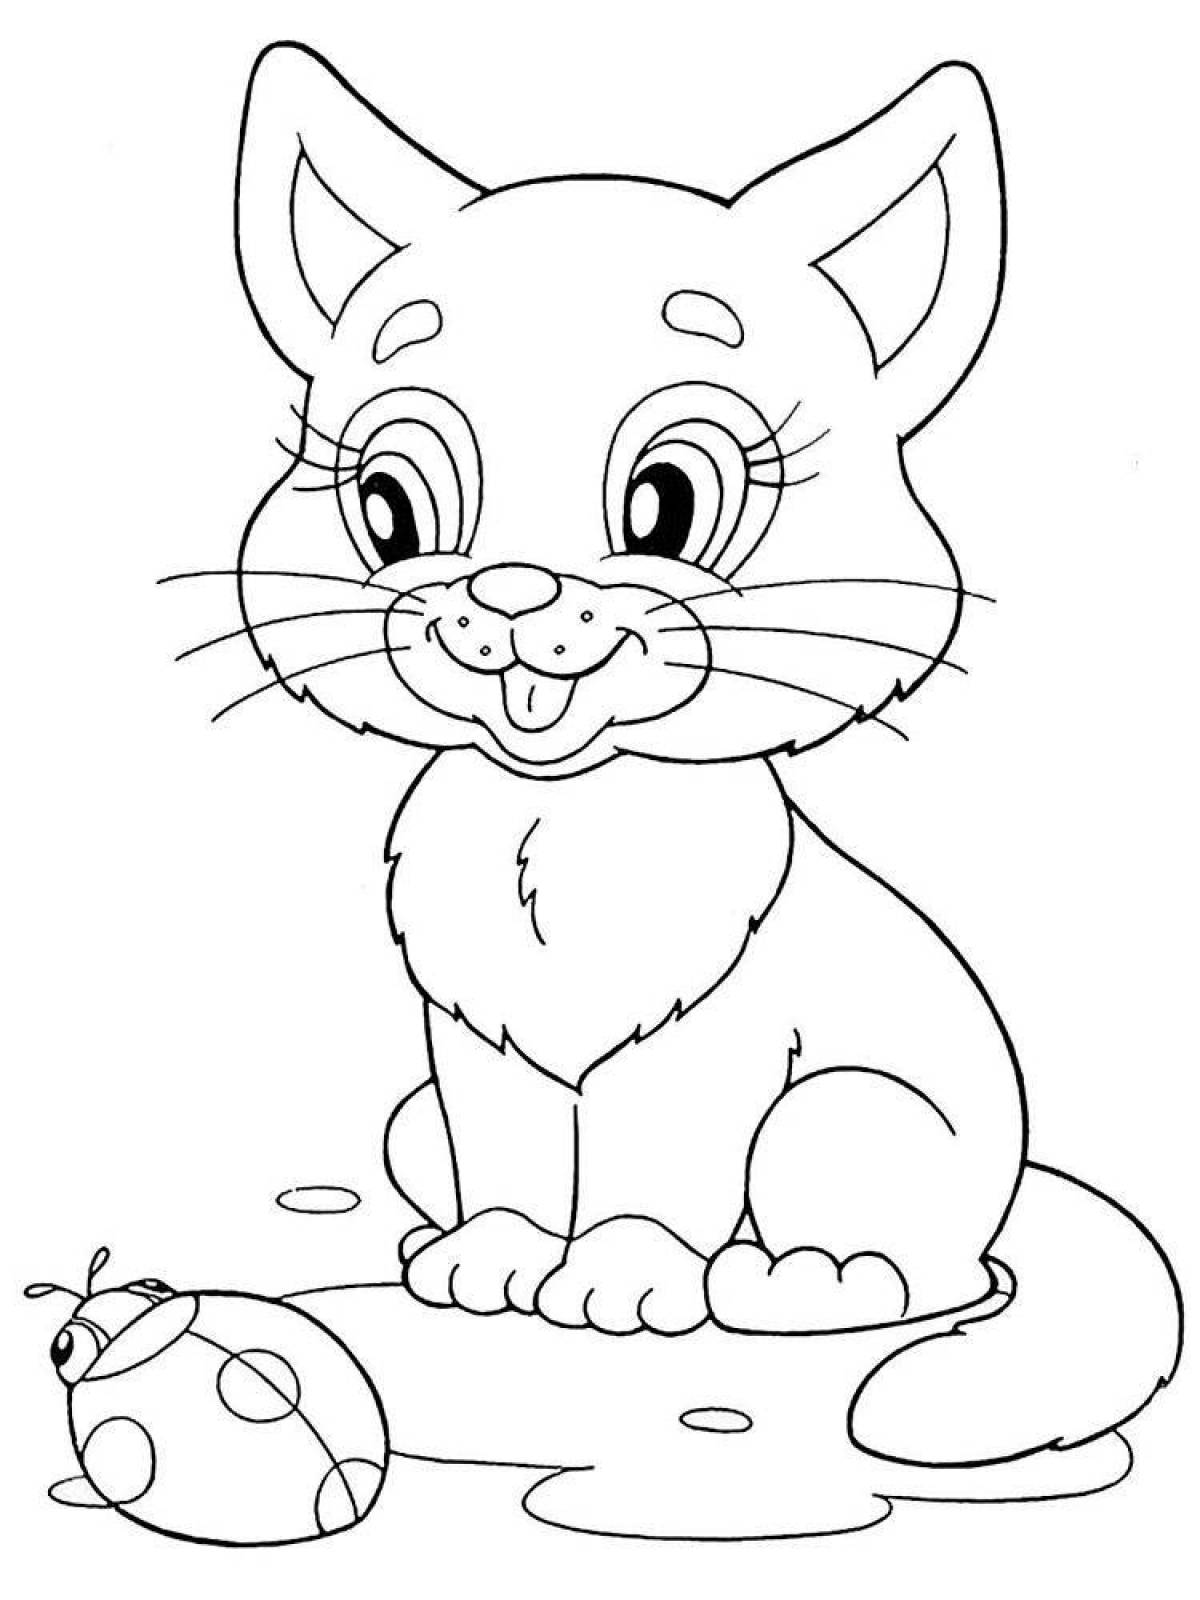 Colorful kitty coloring book for children 4-5 years old